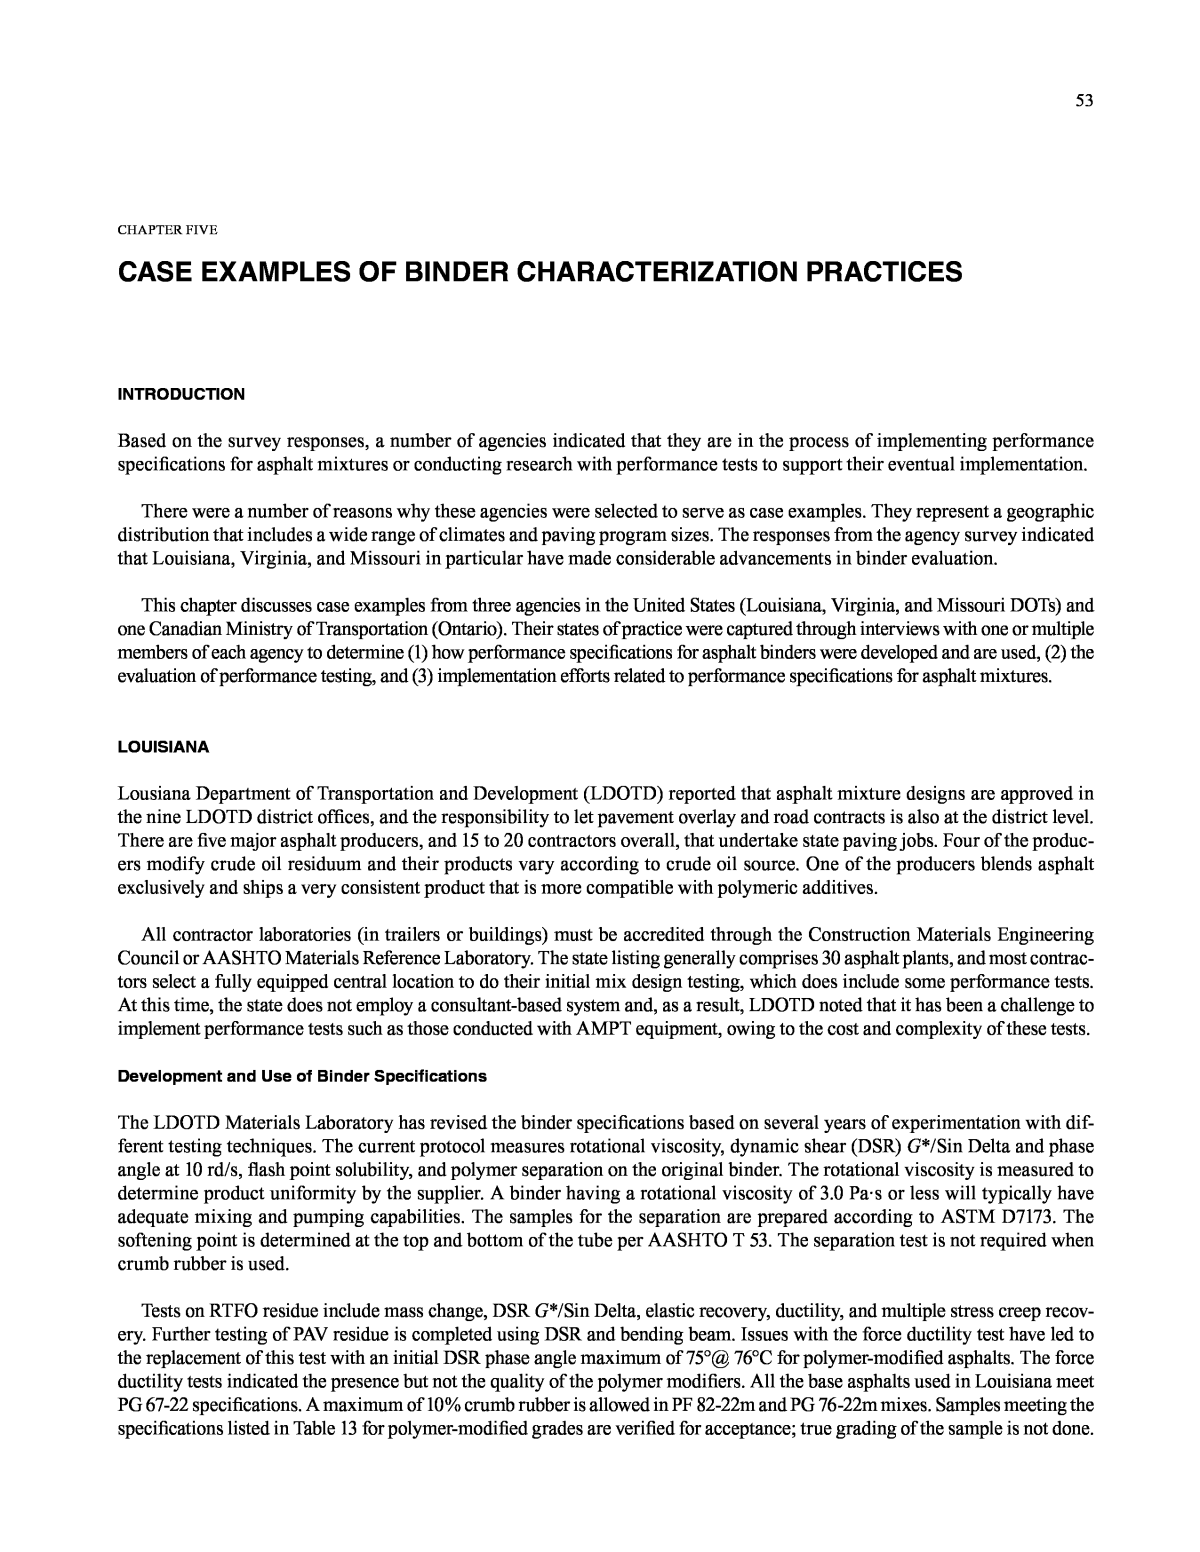 CHAPTER FIVE Case Examples of Binder Characterization Practices